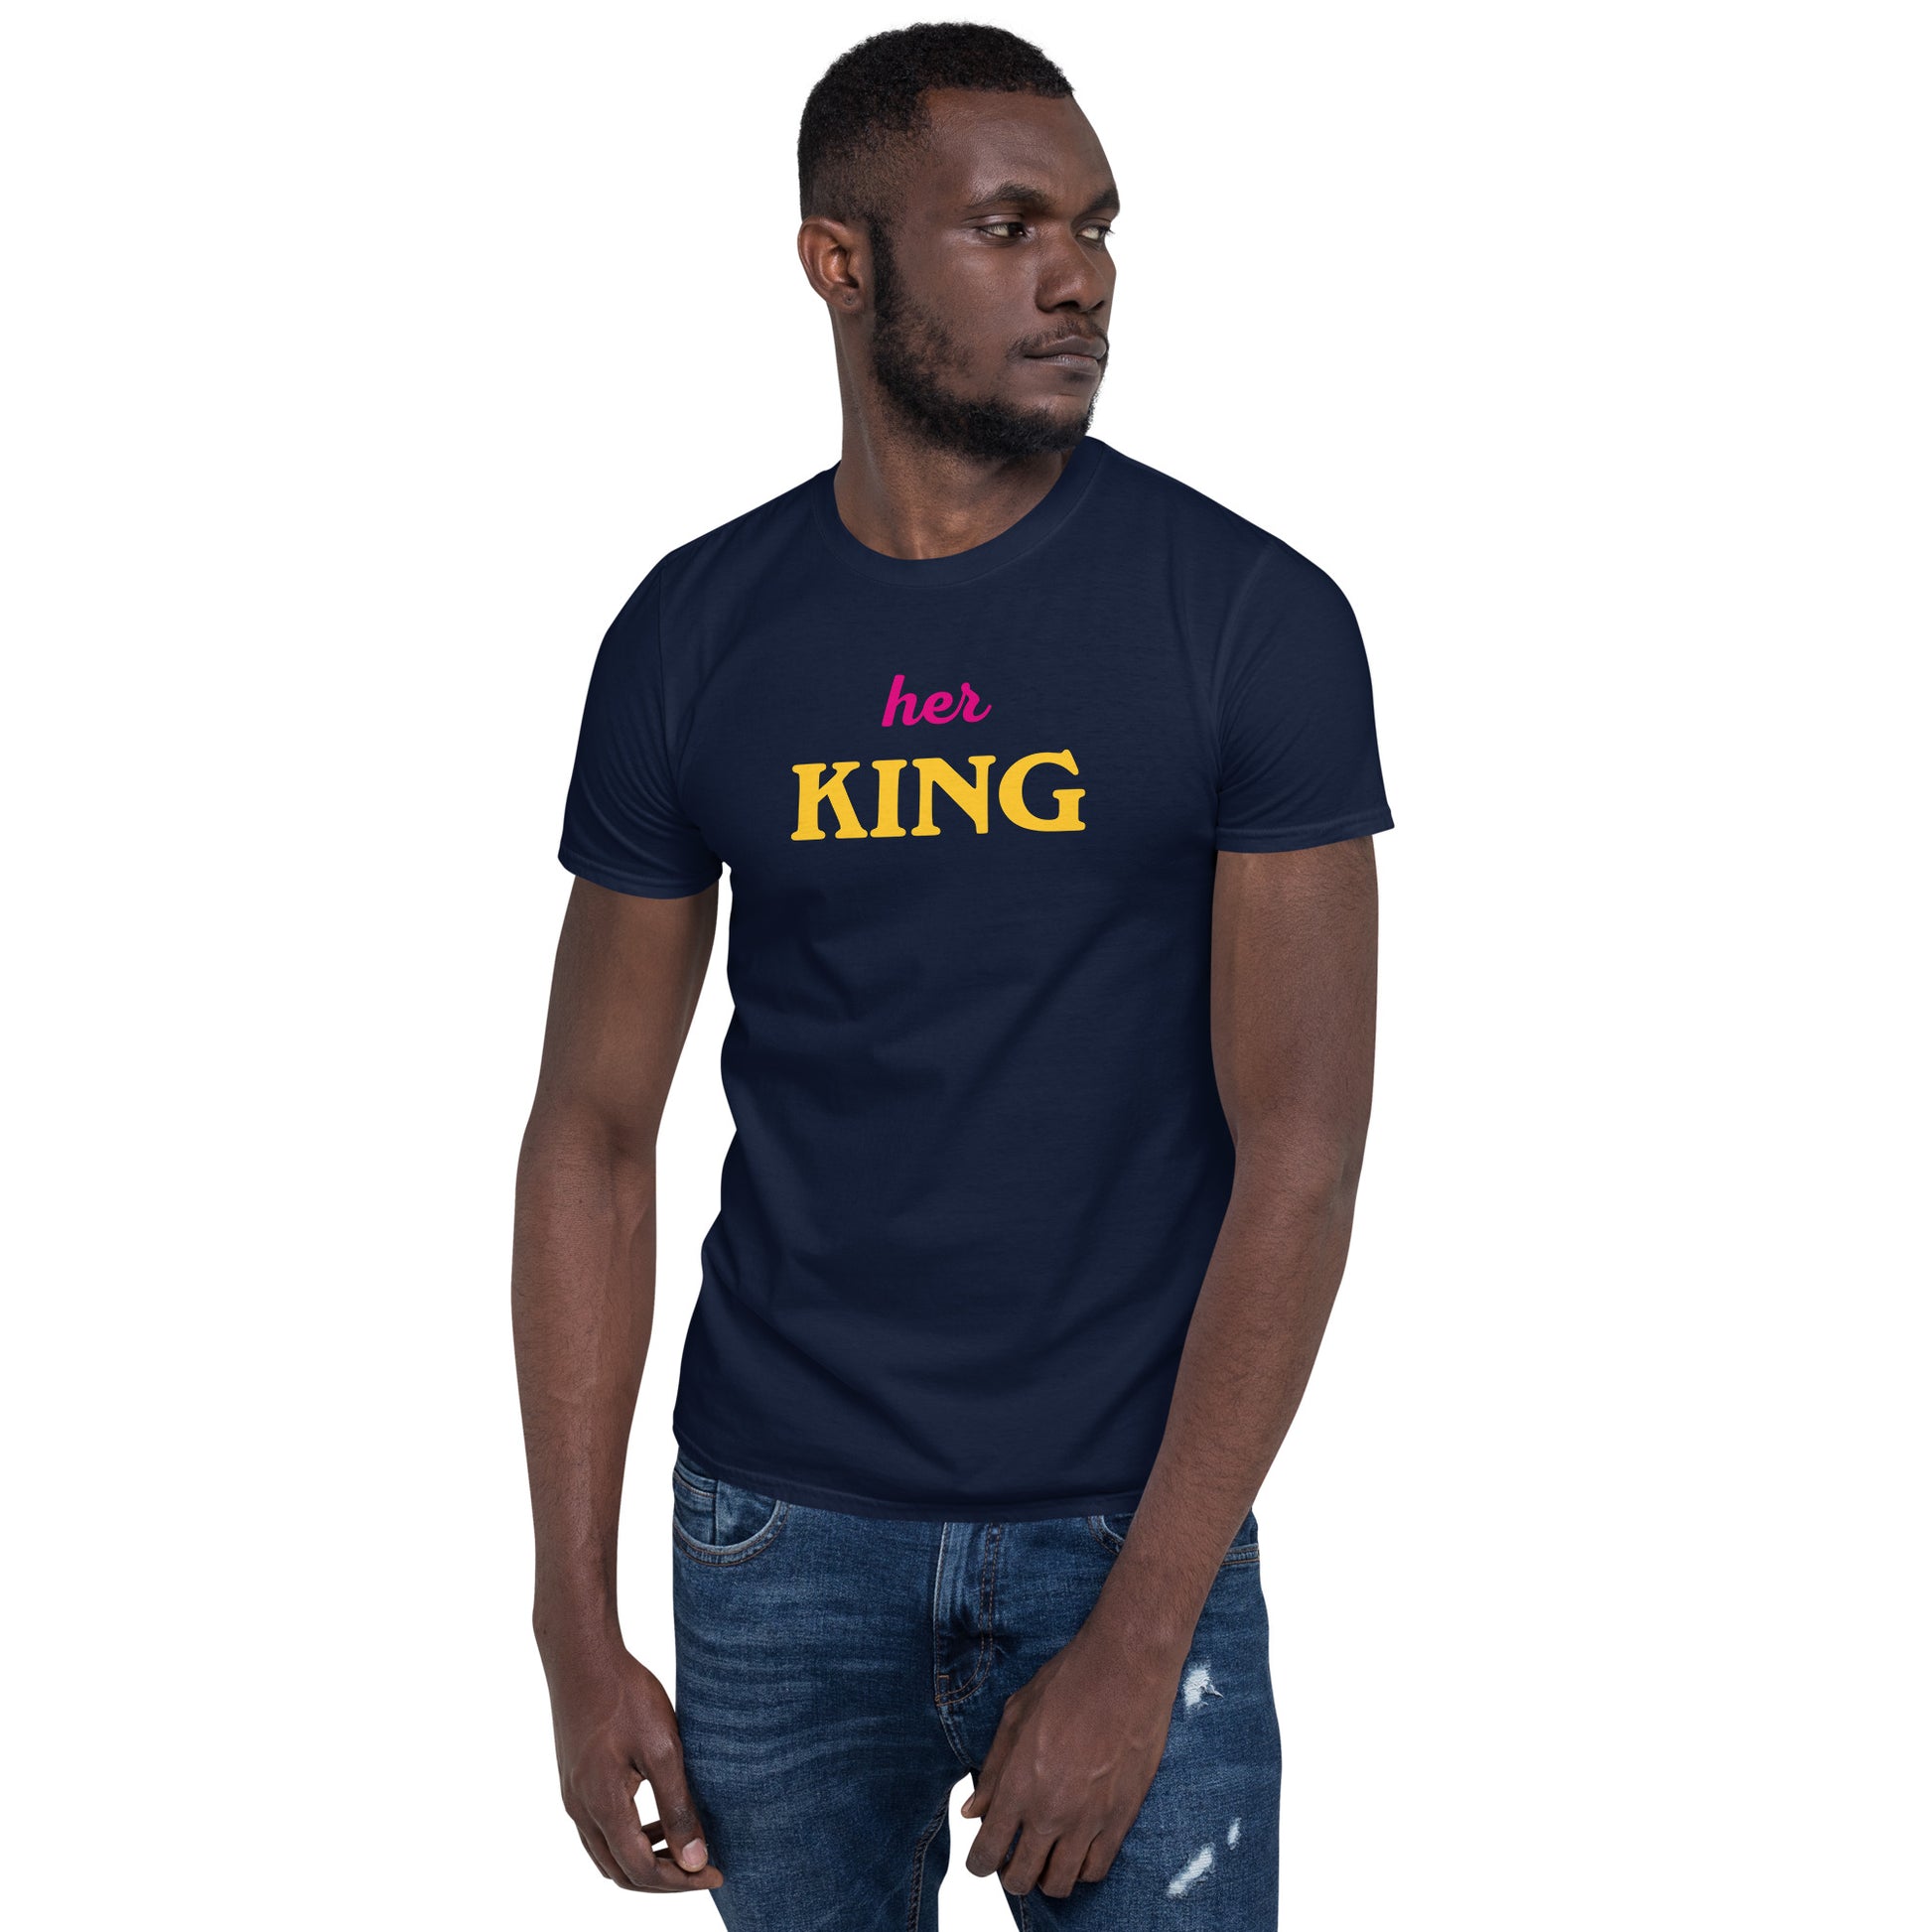 Her King Softstyle T-Shirt navy